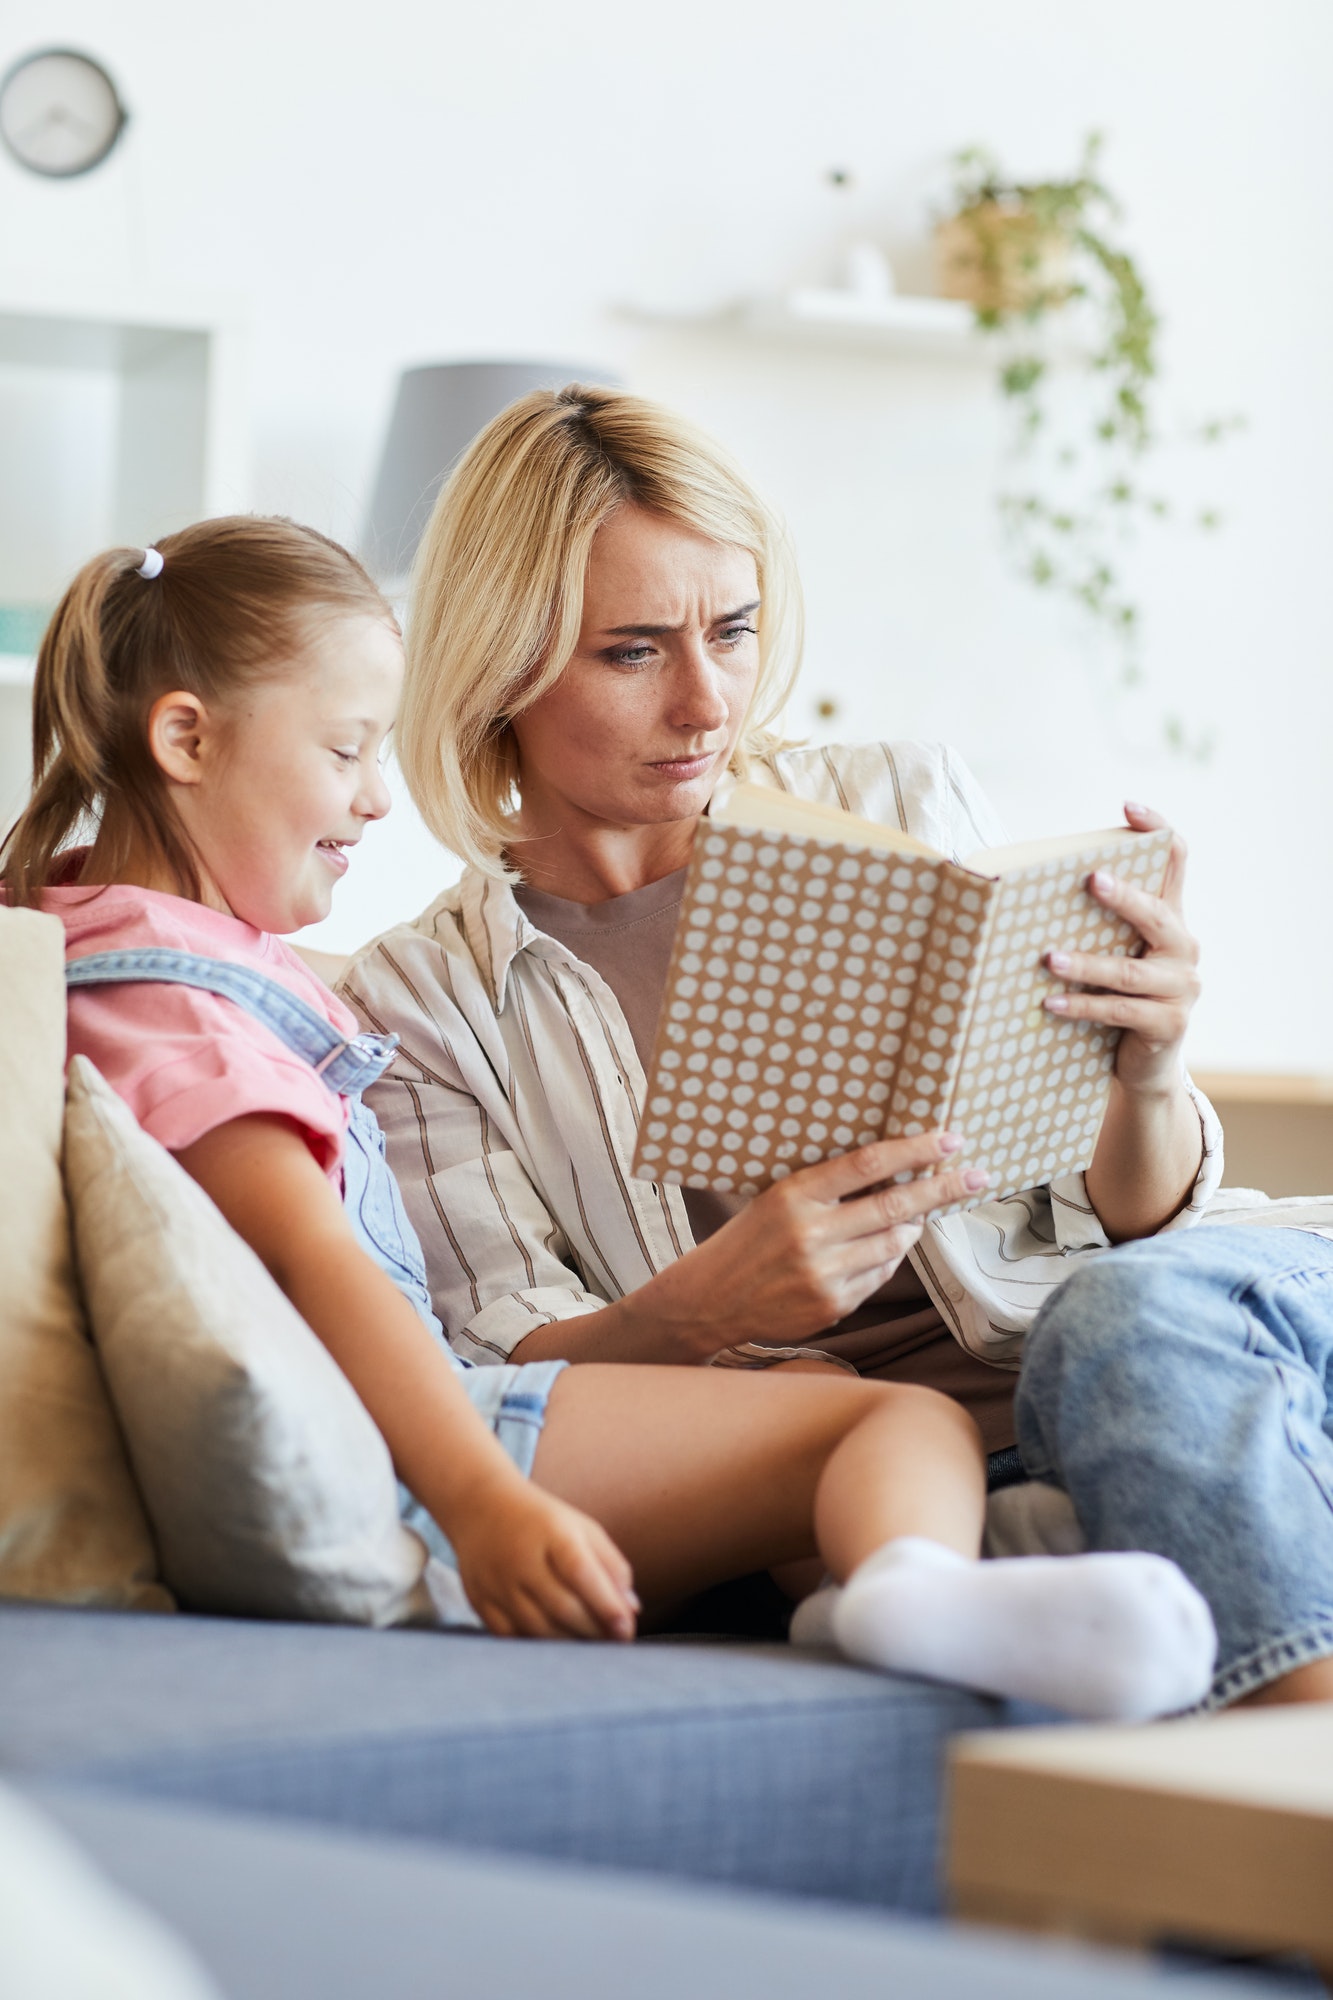 Woman reading a book to girl